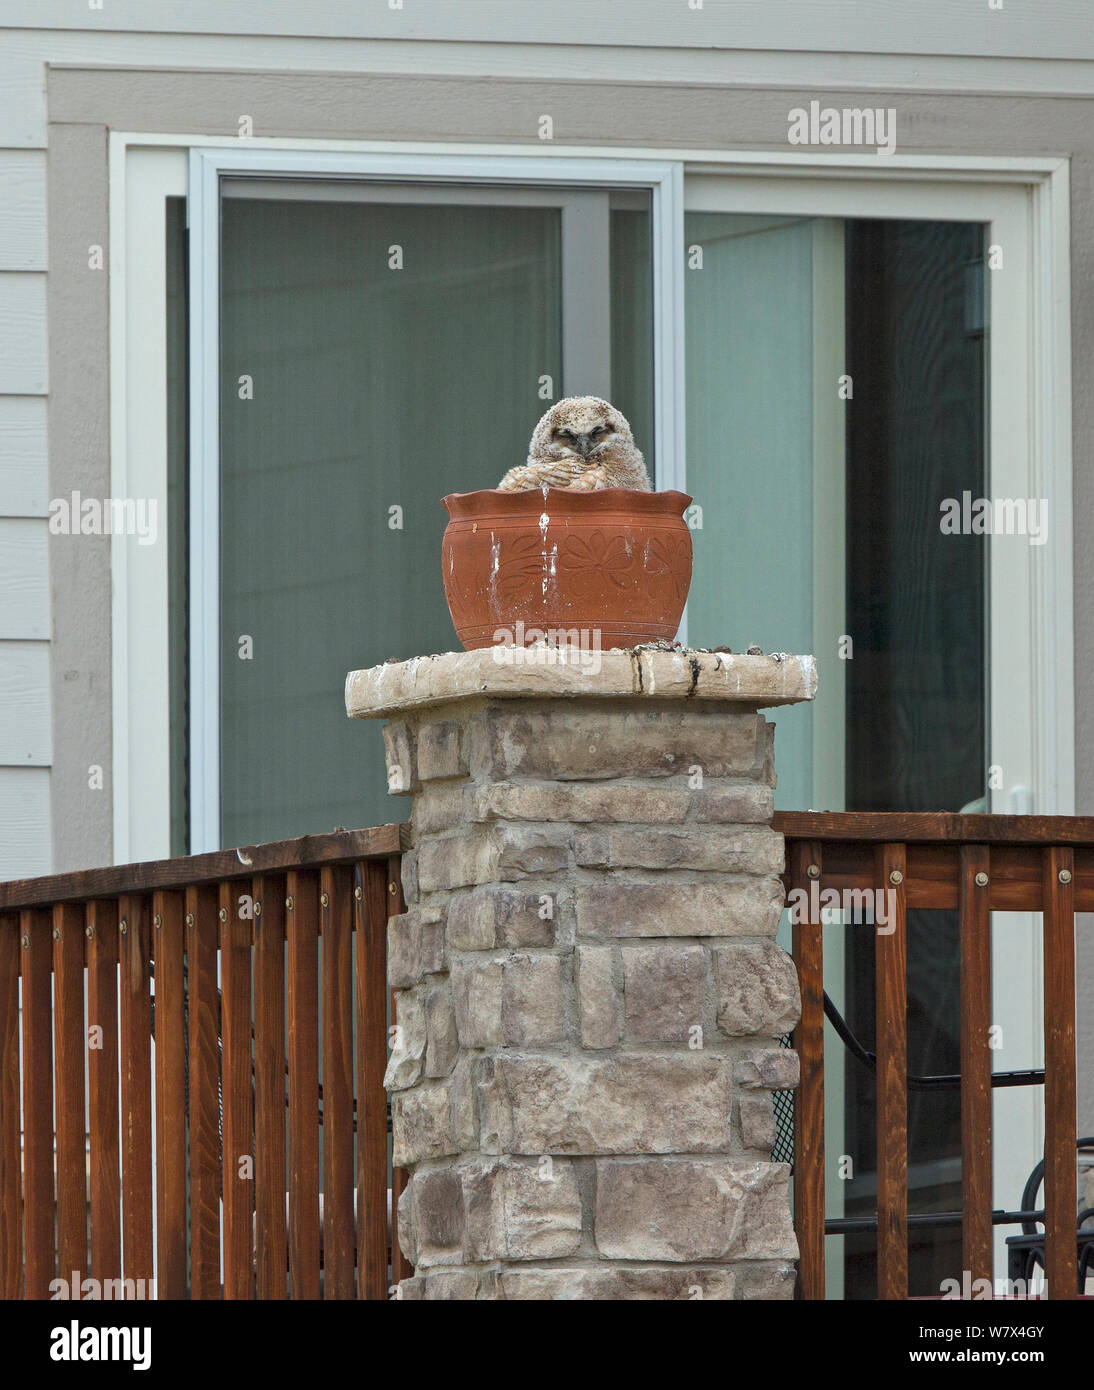 Great horned owl (Bubo virginianus), large chick in nest in a plant pot outside house, Aurora, May. Stock Photo